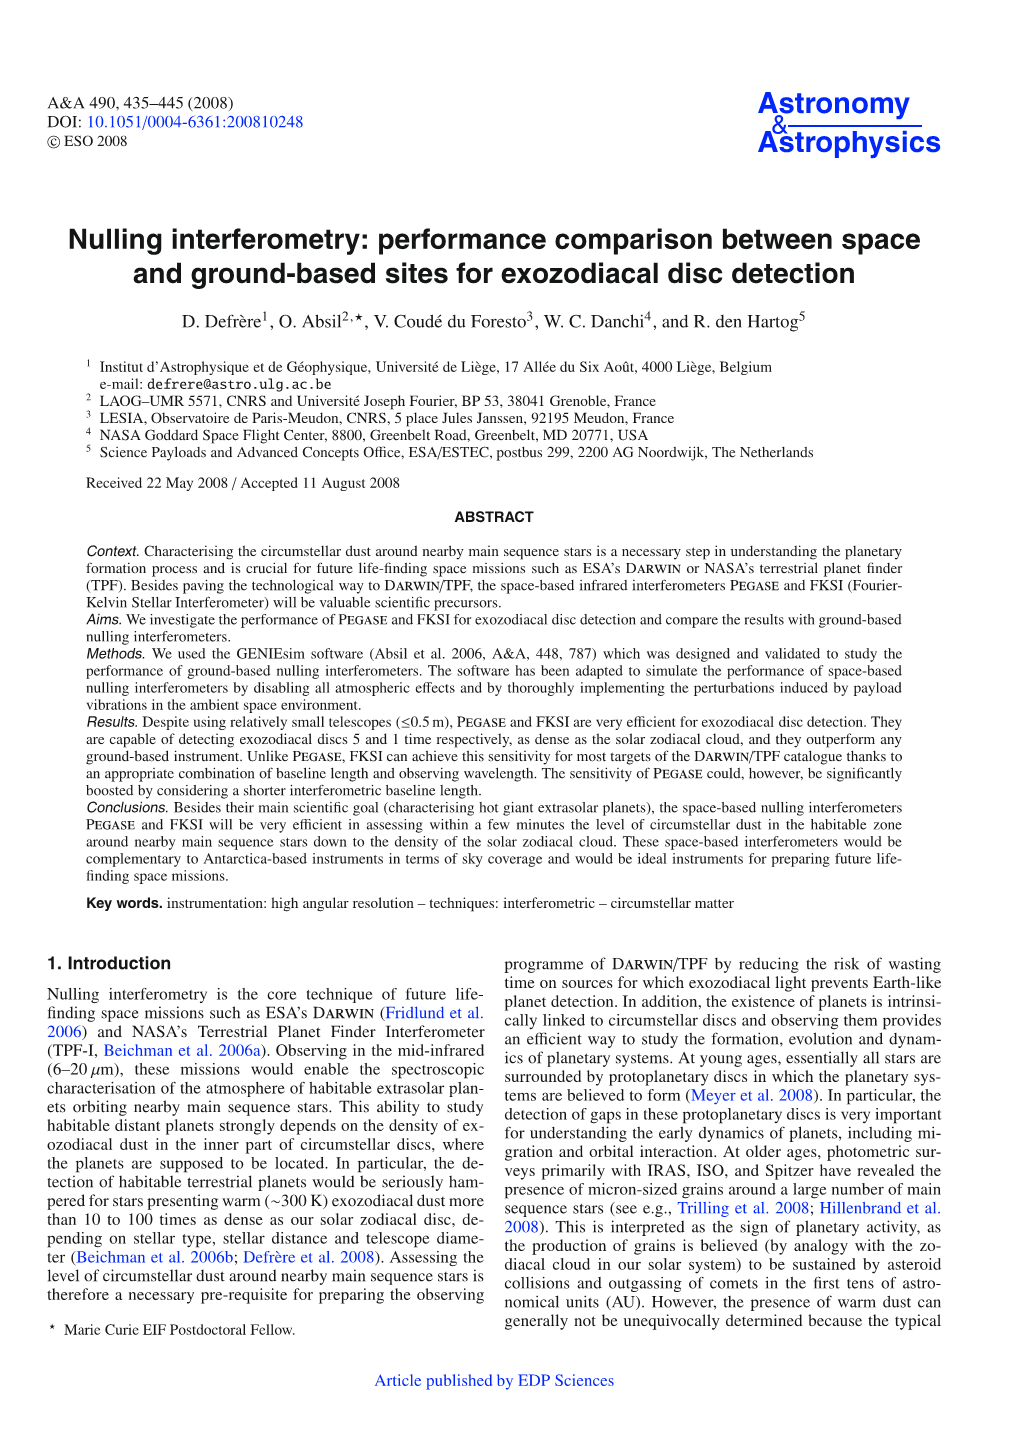 Nulling Interferometry: Performance Comparison Between Space and Ground-Based Sites for Exozodiacal Disc Detection